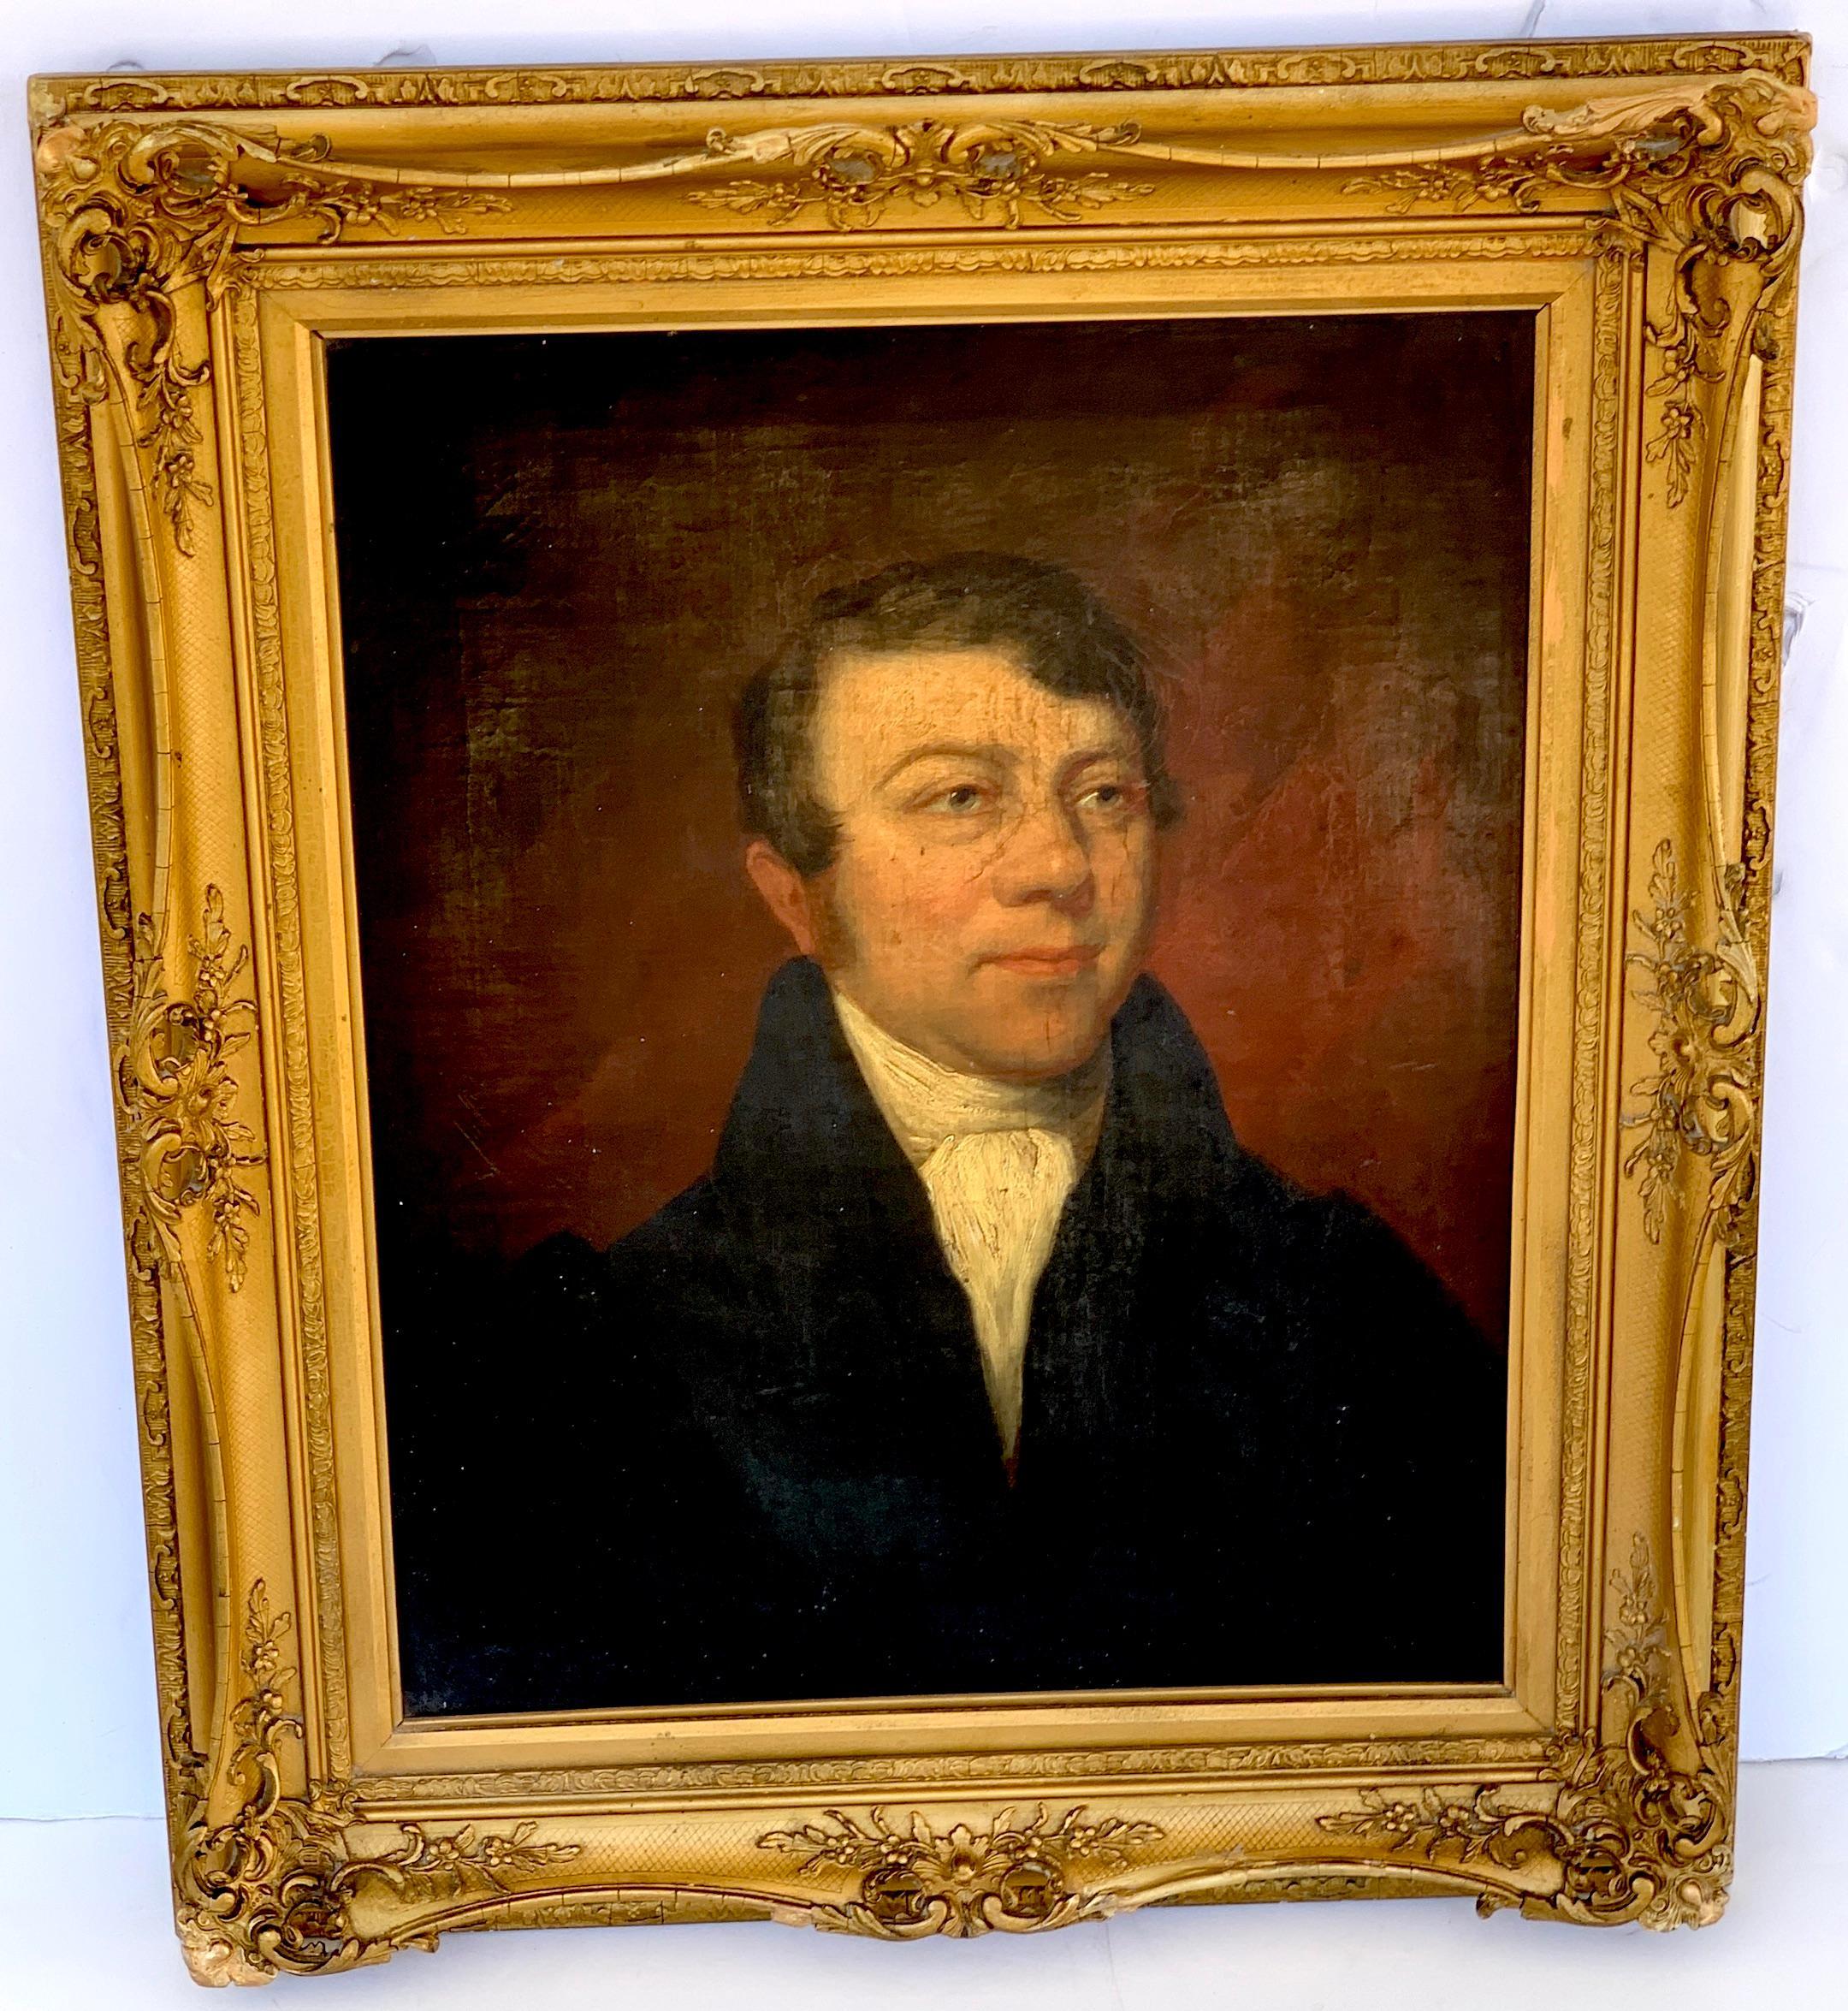 Handsome 19th C American portrait of a gentleman with a scar, A fine well proportioned portrait of a seated man with white shirt and black jacket. Complete with period carved giltwood frame. 
Measures: Oil on Canvas 19